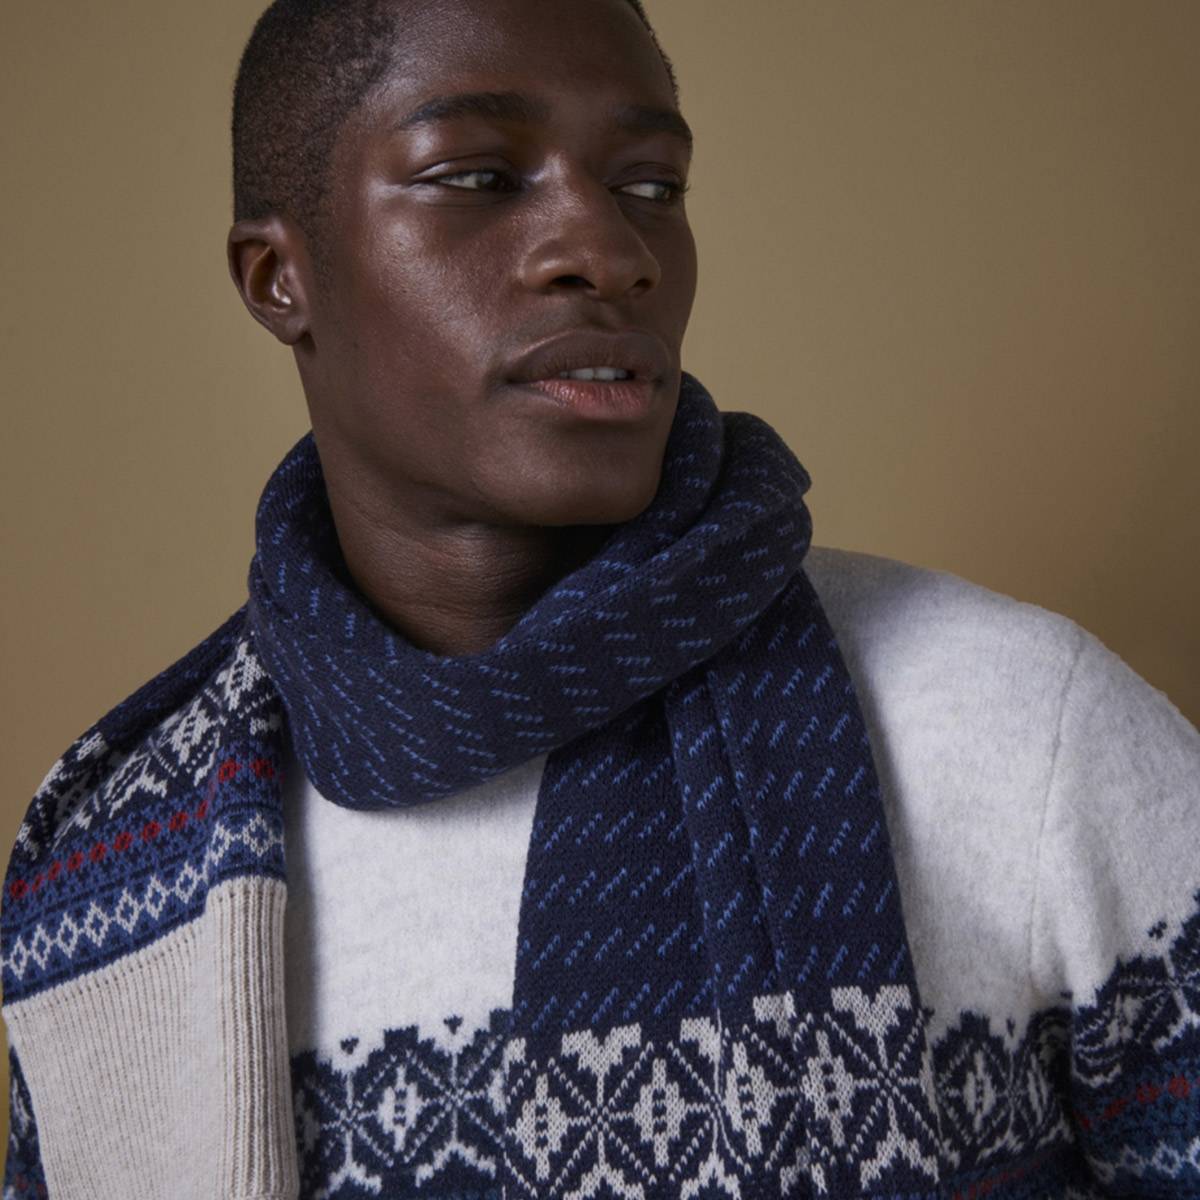 Man wearing knitted jumper and scarf. Shop knitwear